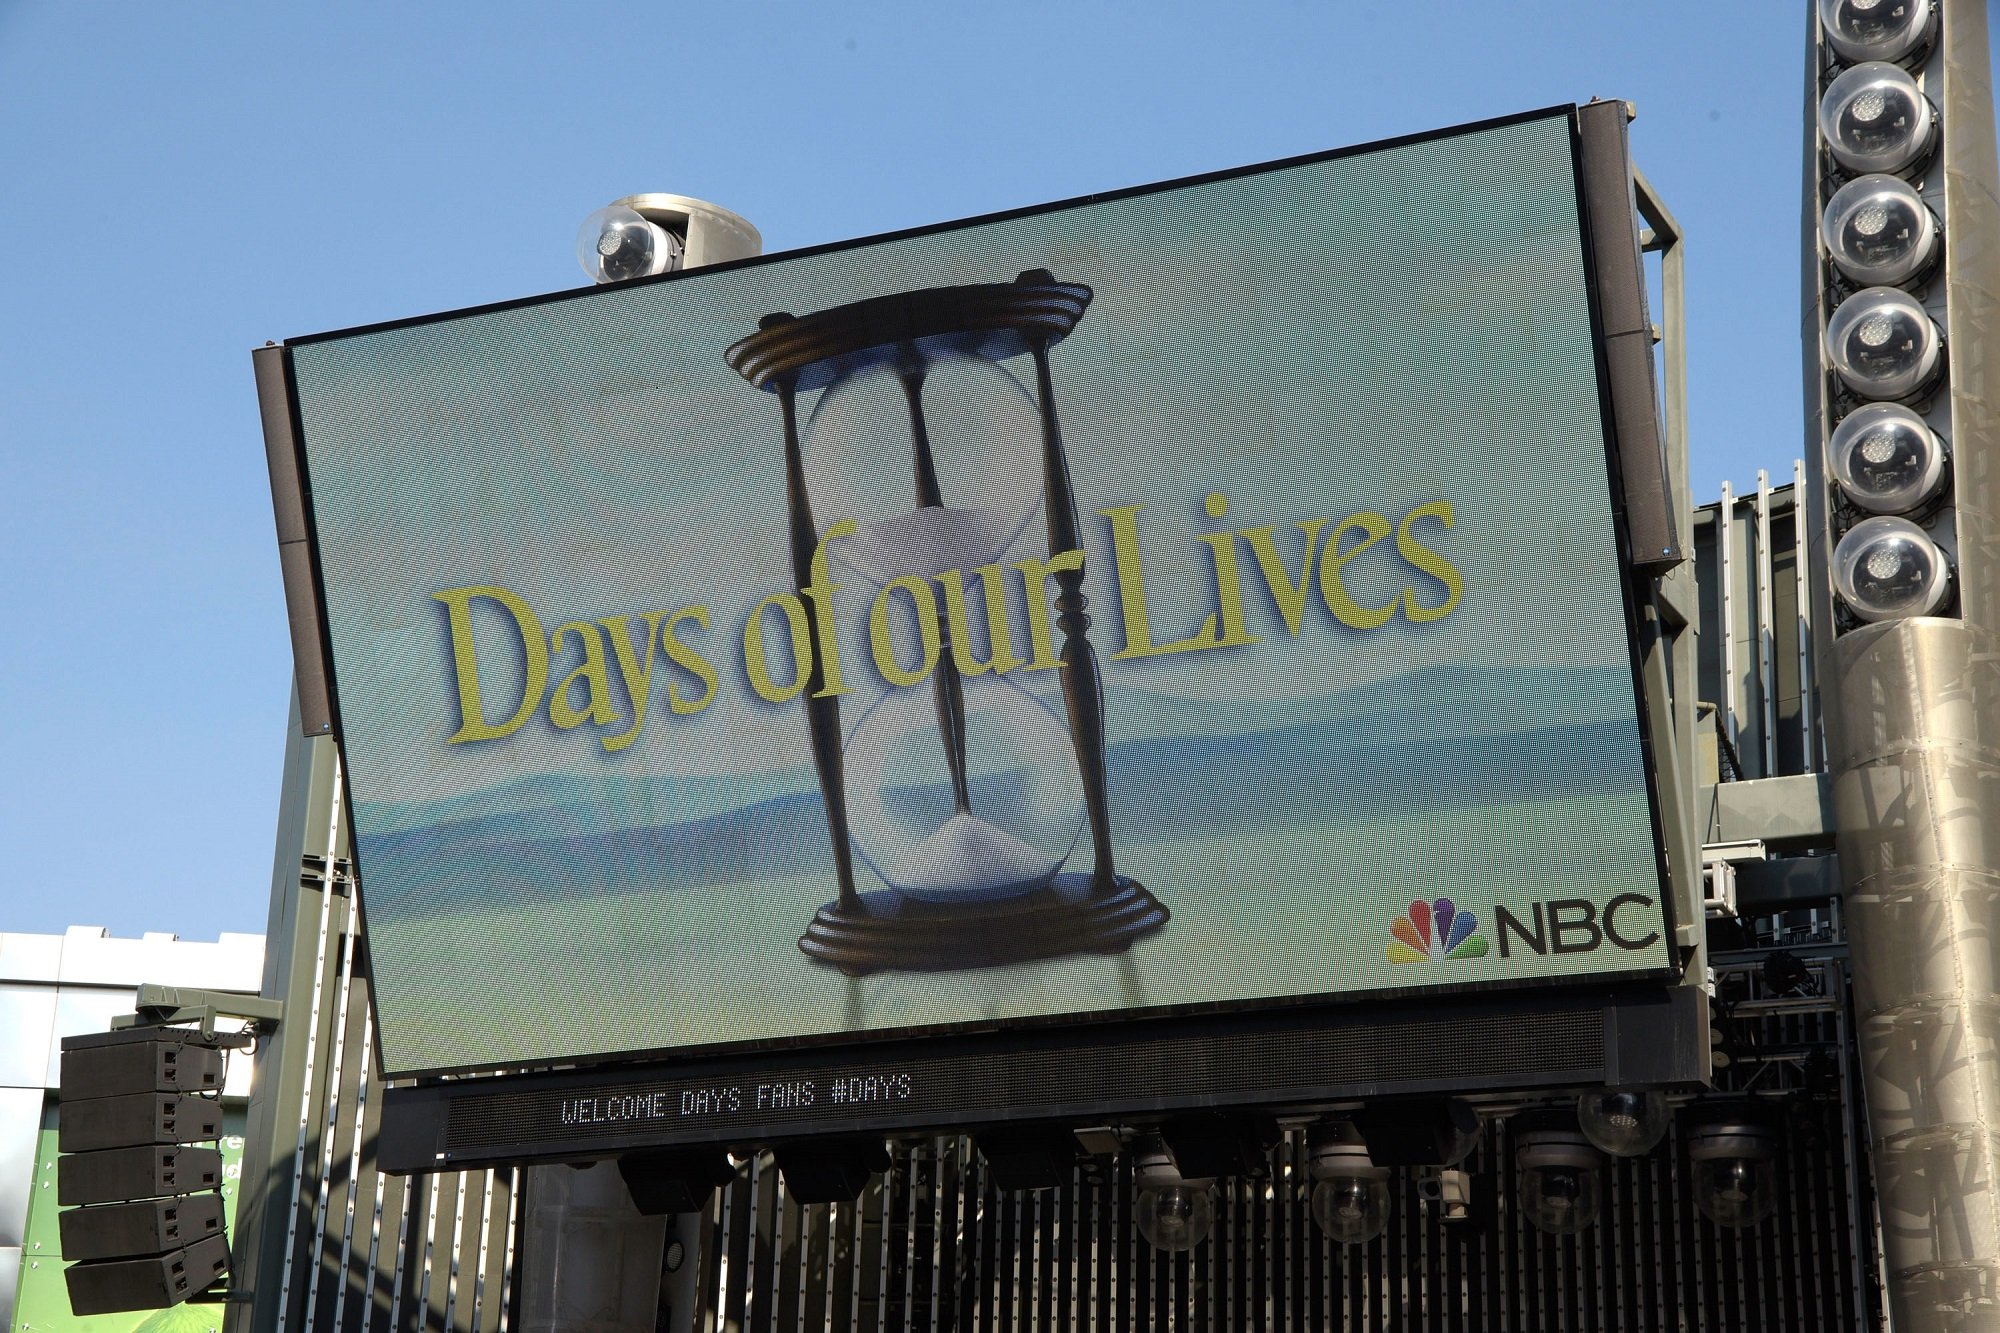 A 'Days of Our Lives' sign